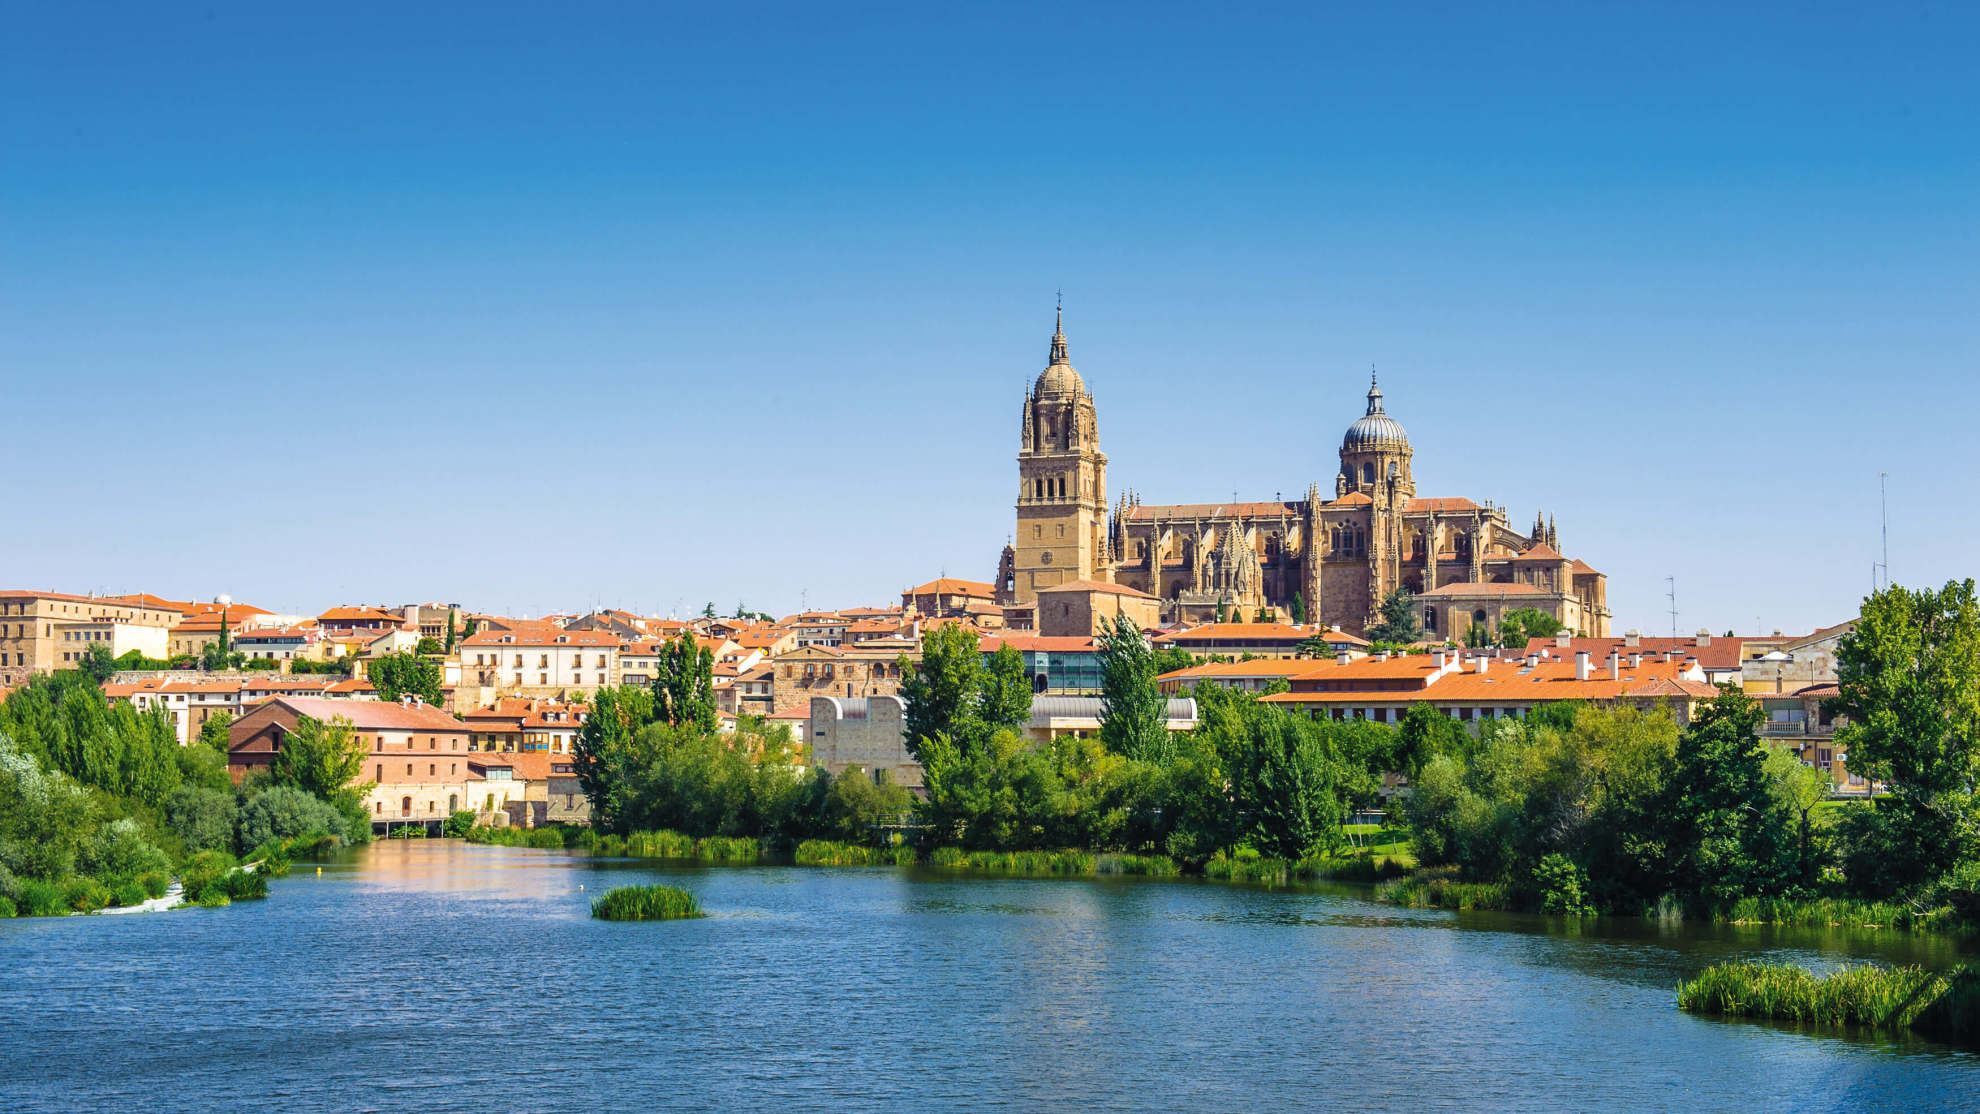 View of Salamanca's cathedral from across the river